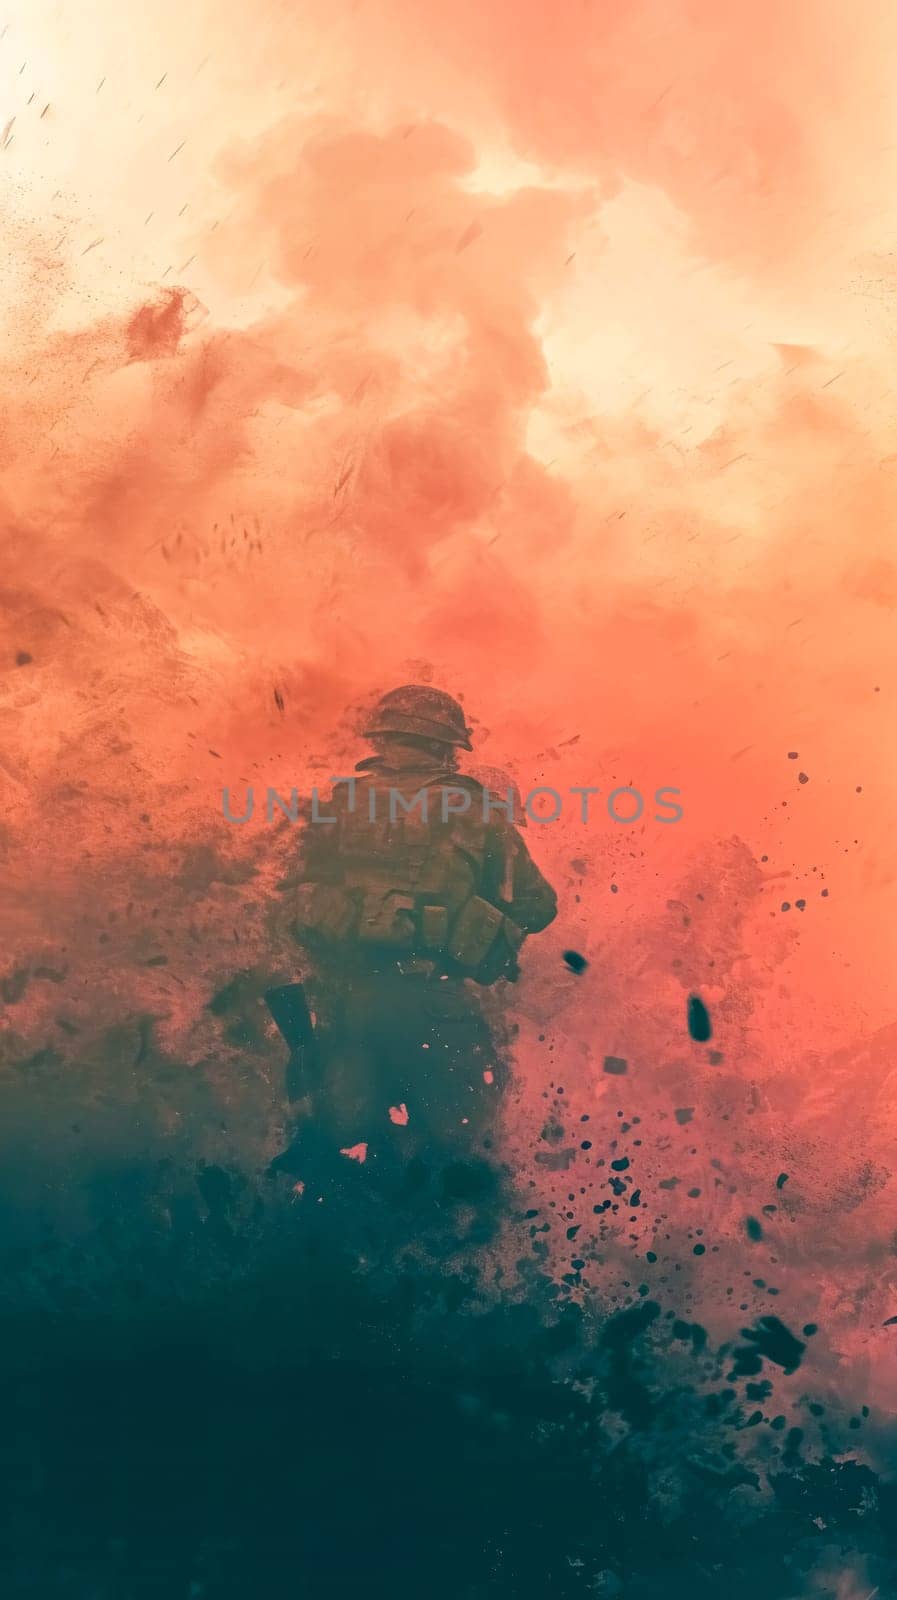 A lone soldier enveloped in a mist of dust and smoke, set against a vibrant backdrop of fiery orange to deep teal, suggesting a scene of intense conflict or aftermath. by Edophoto